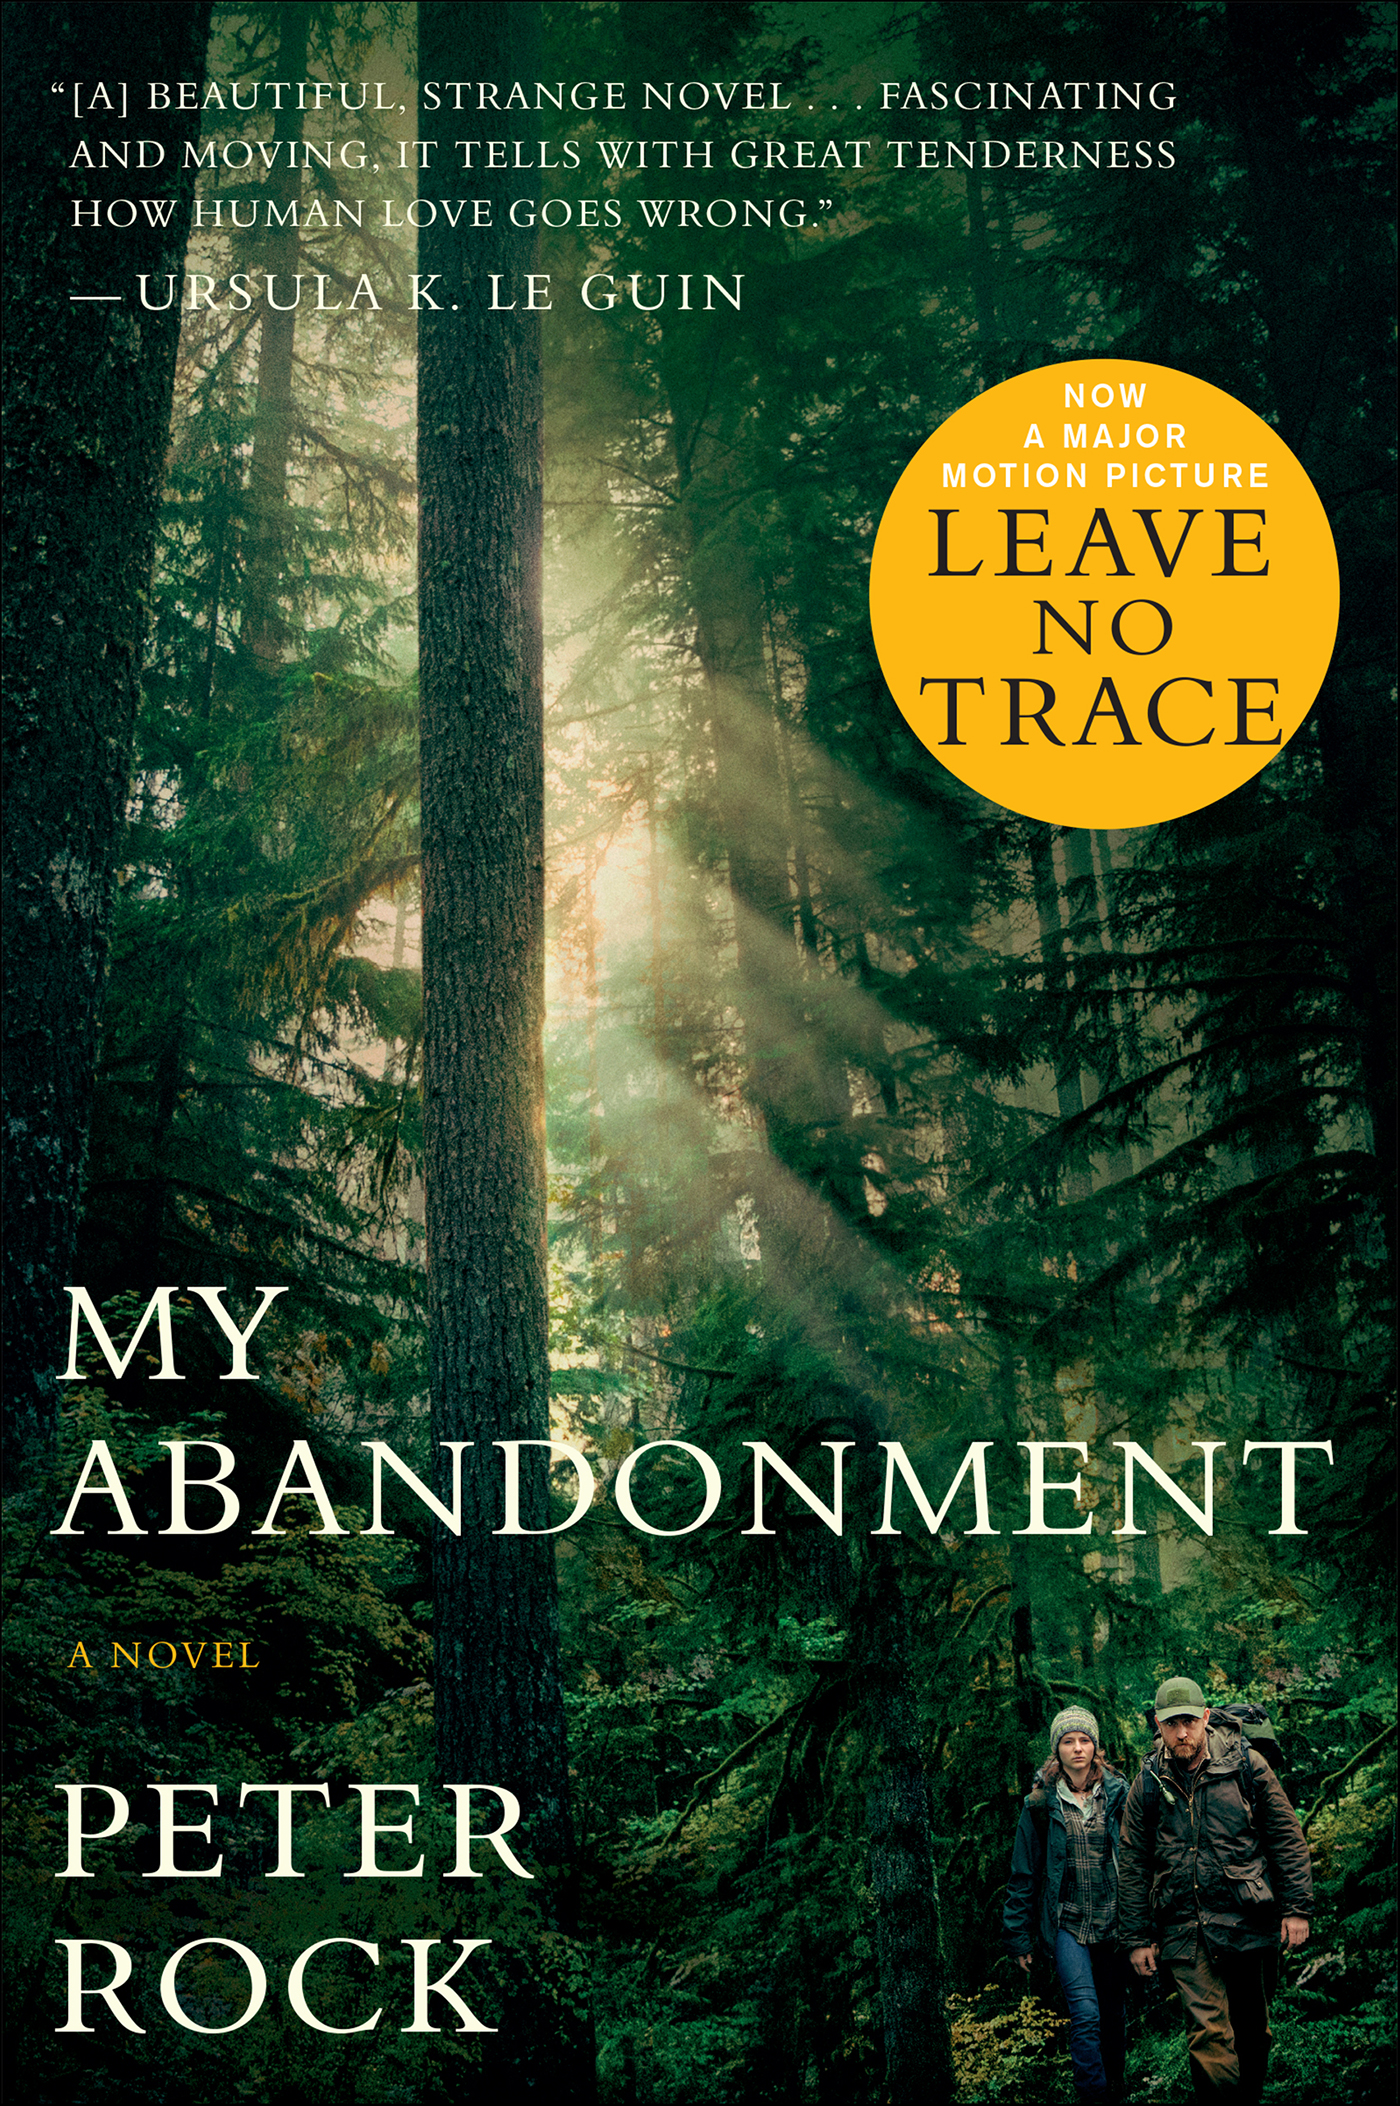  My Abandonment by Peter Rock